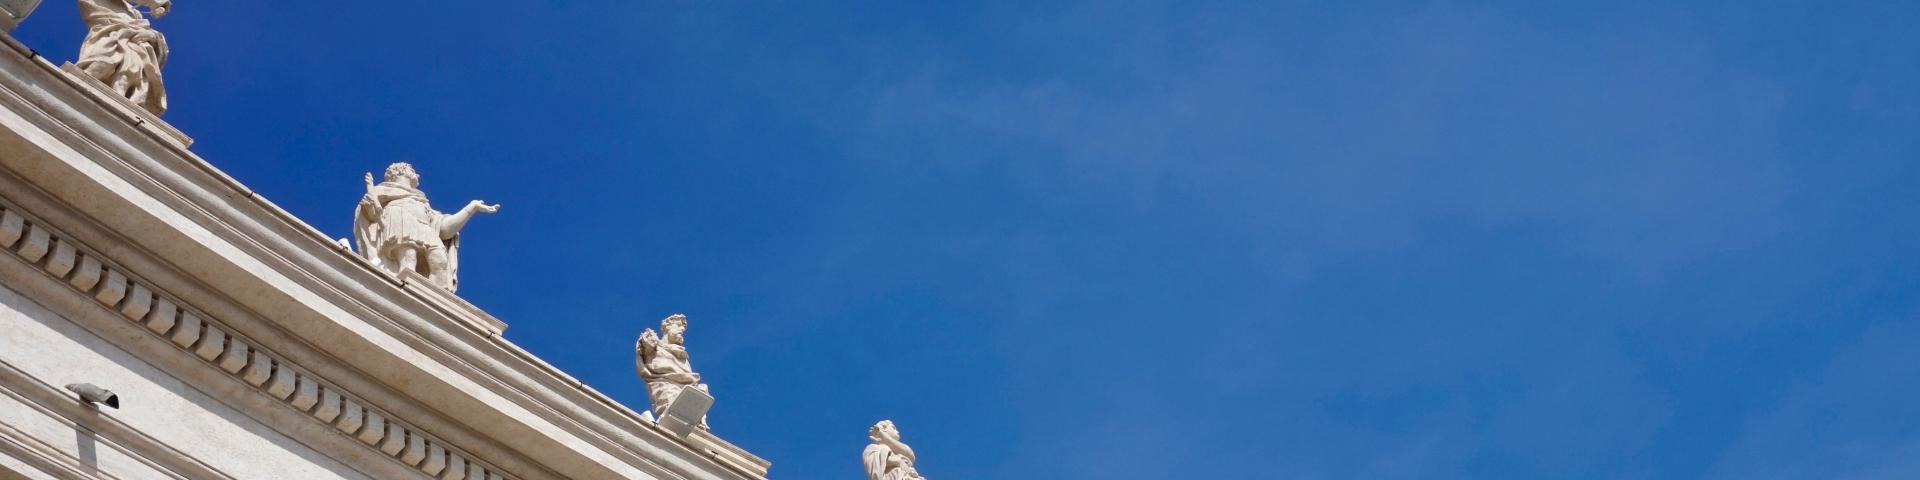 Vatican sculptures of saints with blue sky in the background 